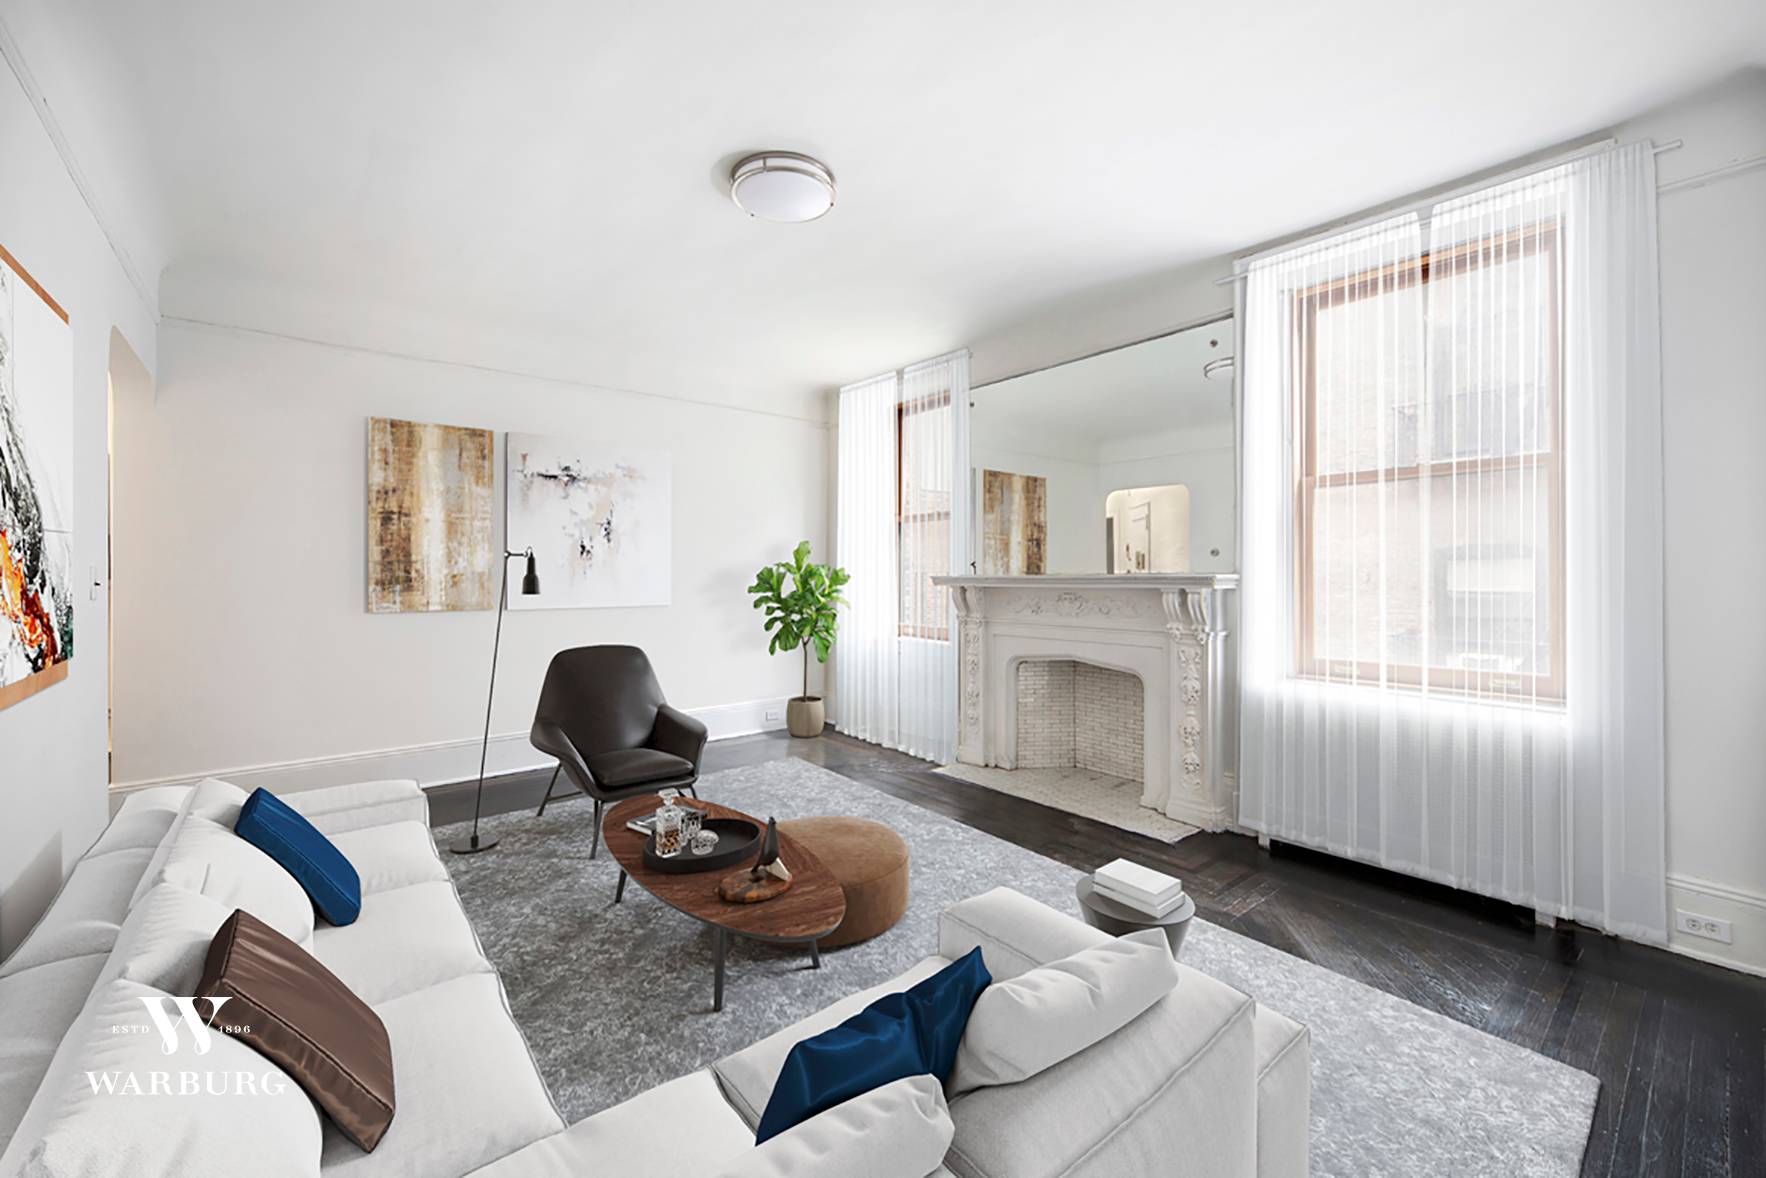 Prewar details and charm abound in this two bedroom, one and one half bath condominium unit at the architecturally famed Britannia, more familiarly known as the A A A Gargoyle ...